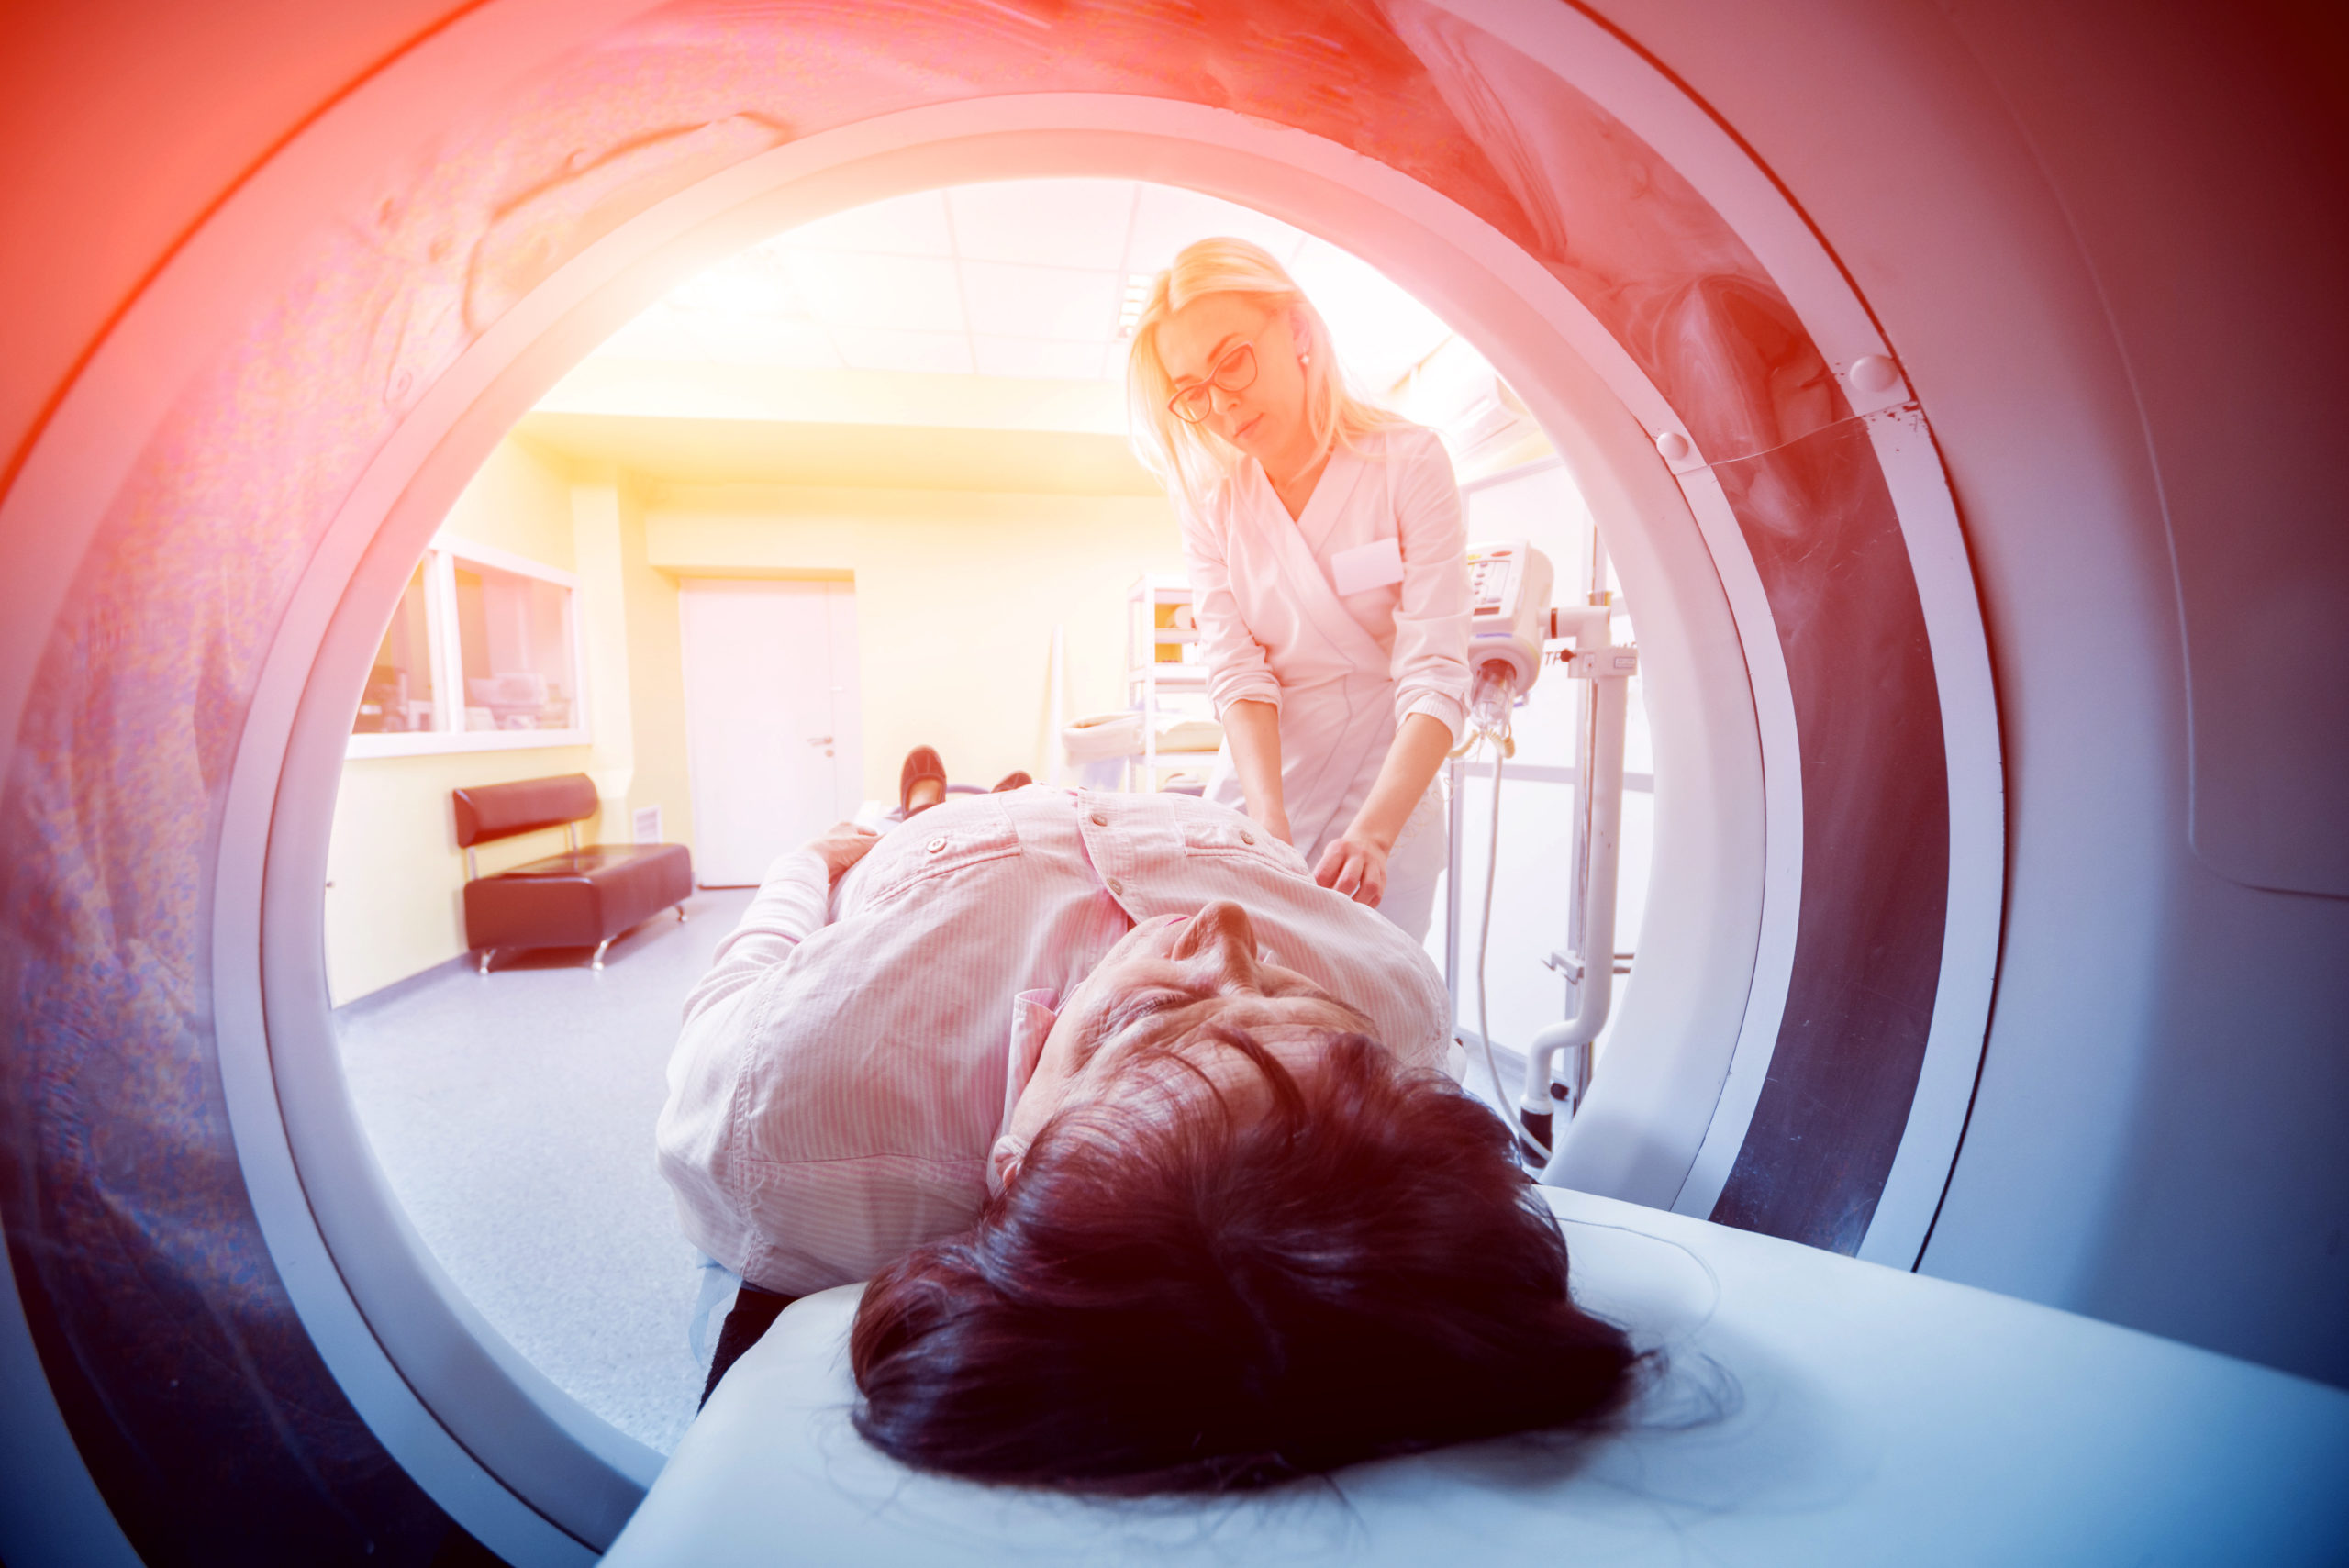 medical imagng requisition management - patient in a CT scanner